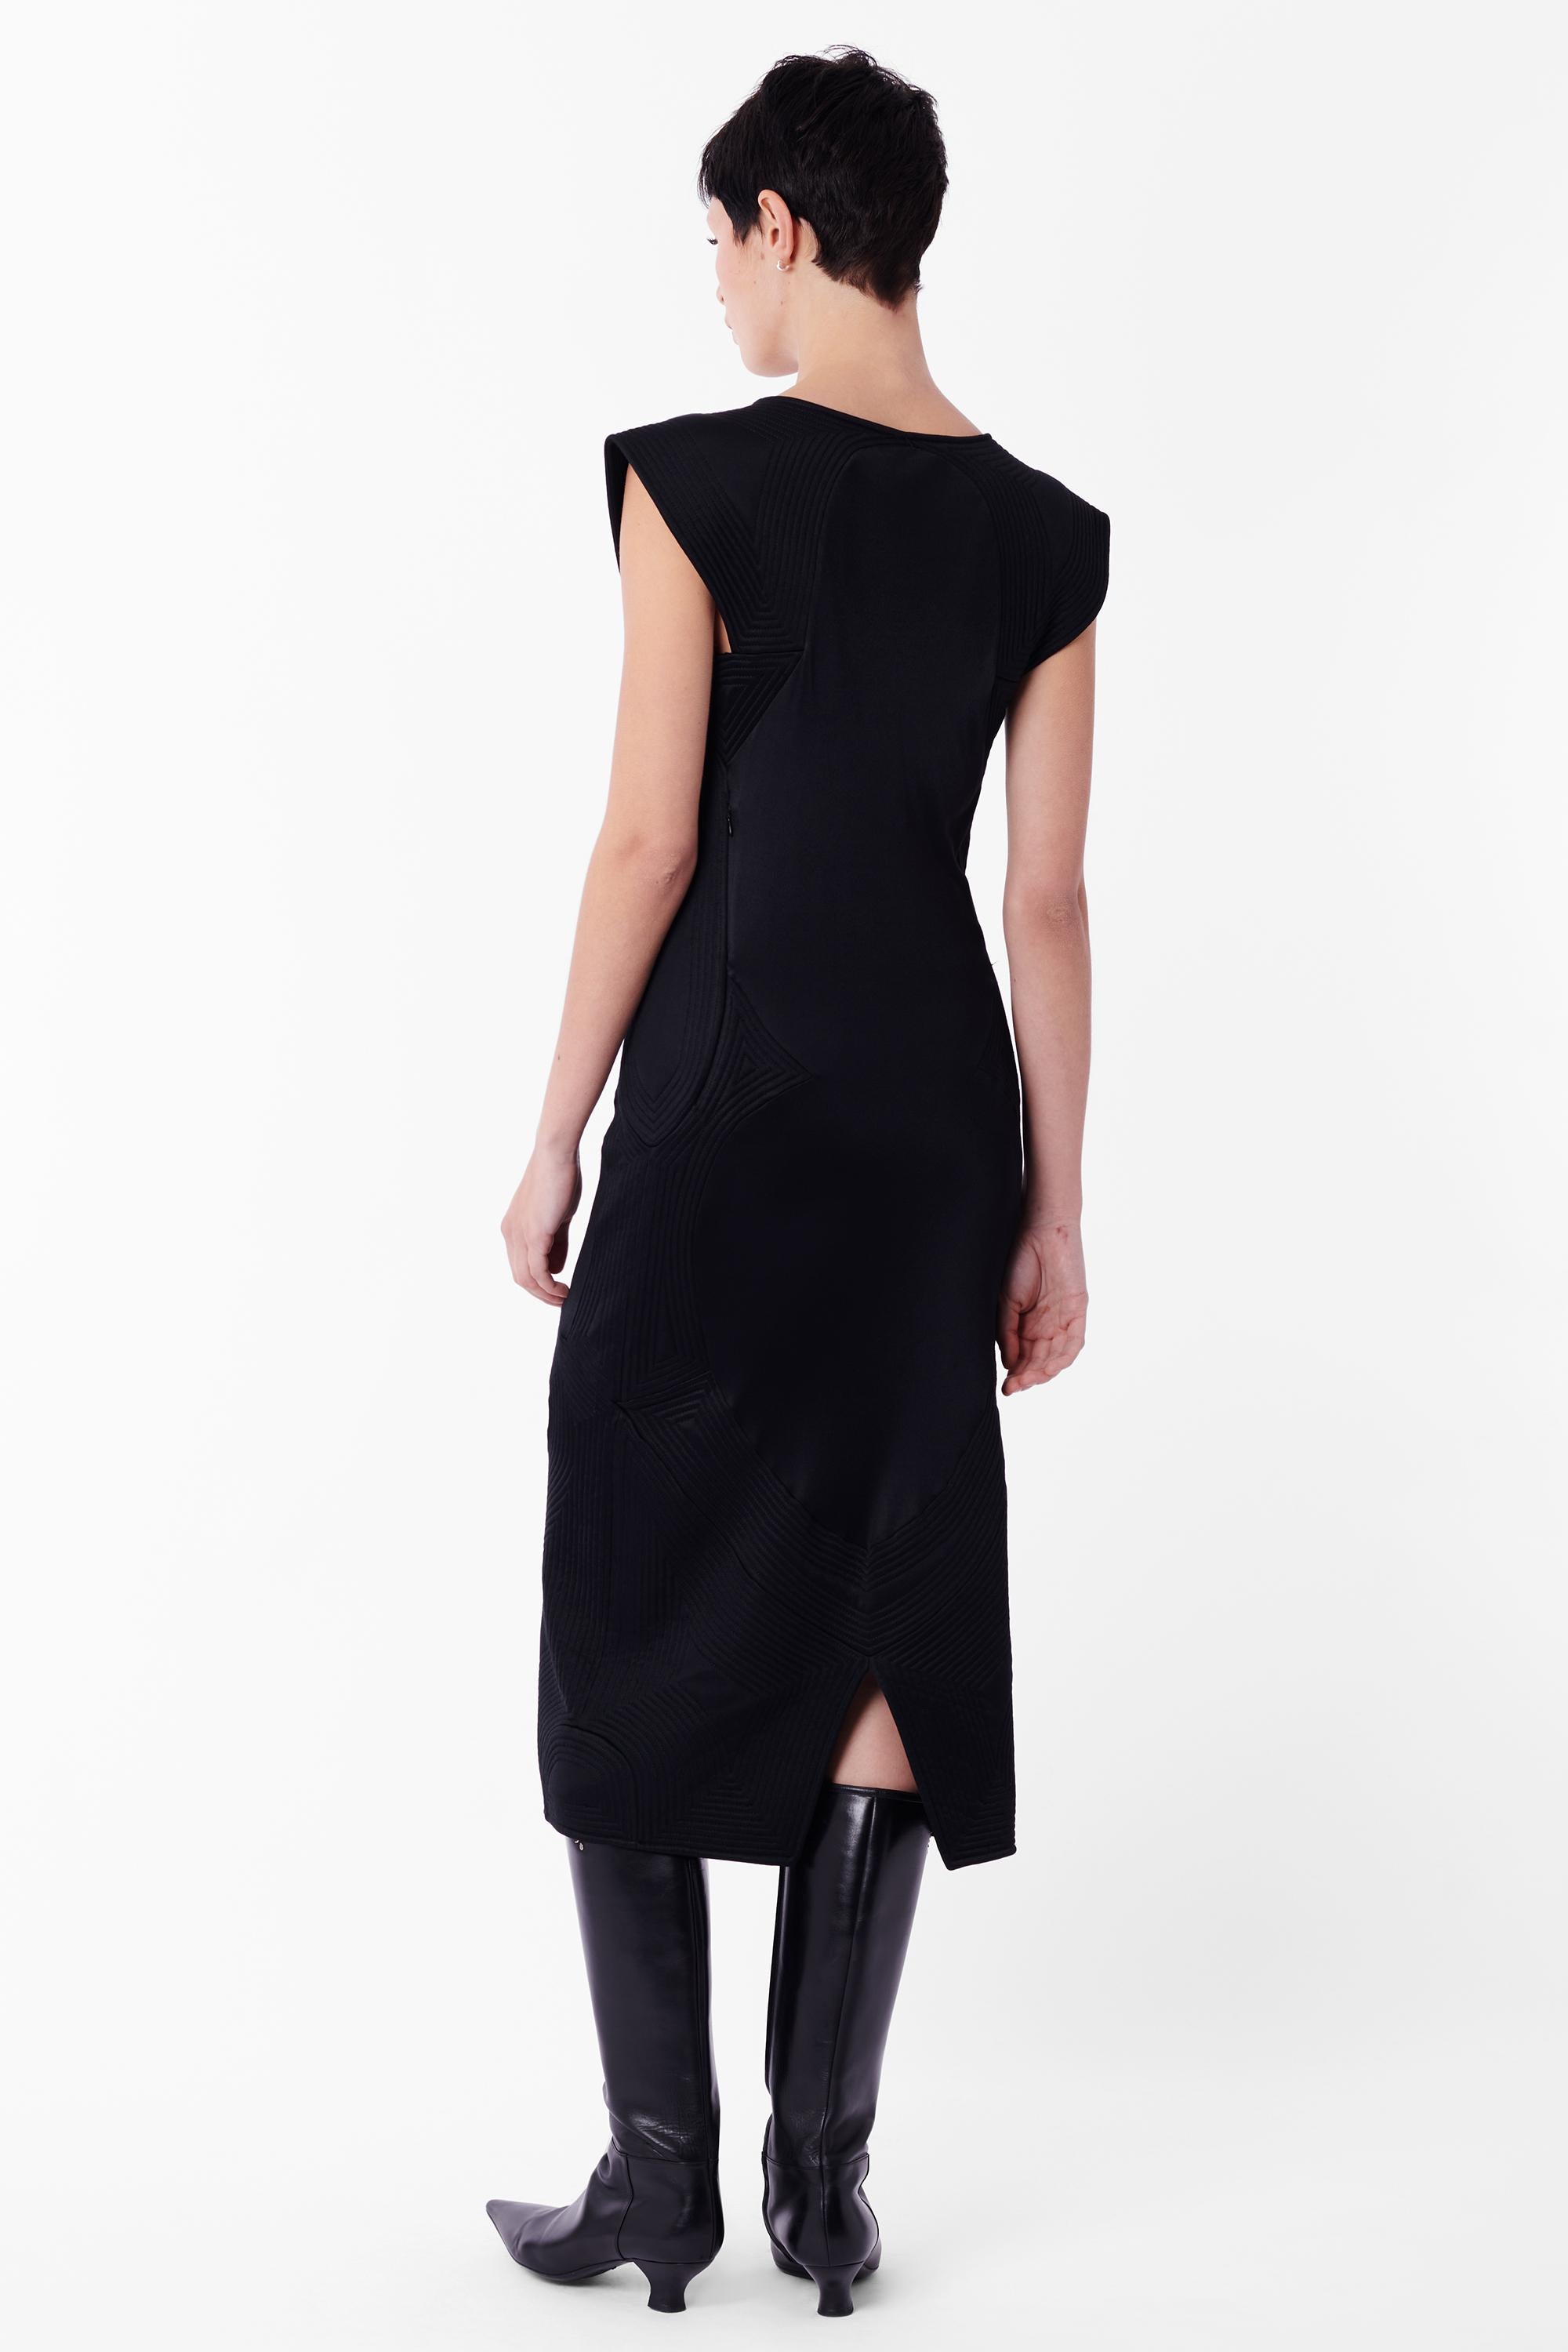 Vintage Tom Ford for Yves Saint Laurent Fall Winter 2004 black midi dress. Features seamed cap sleeves, thick seamed sides, tie up detailing on front right chest and back slit in a midi length. In excellent vintage condition. Authenticity